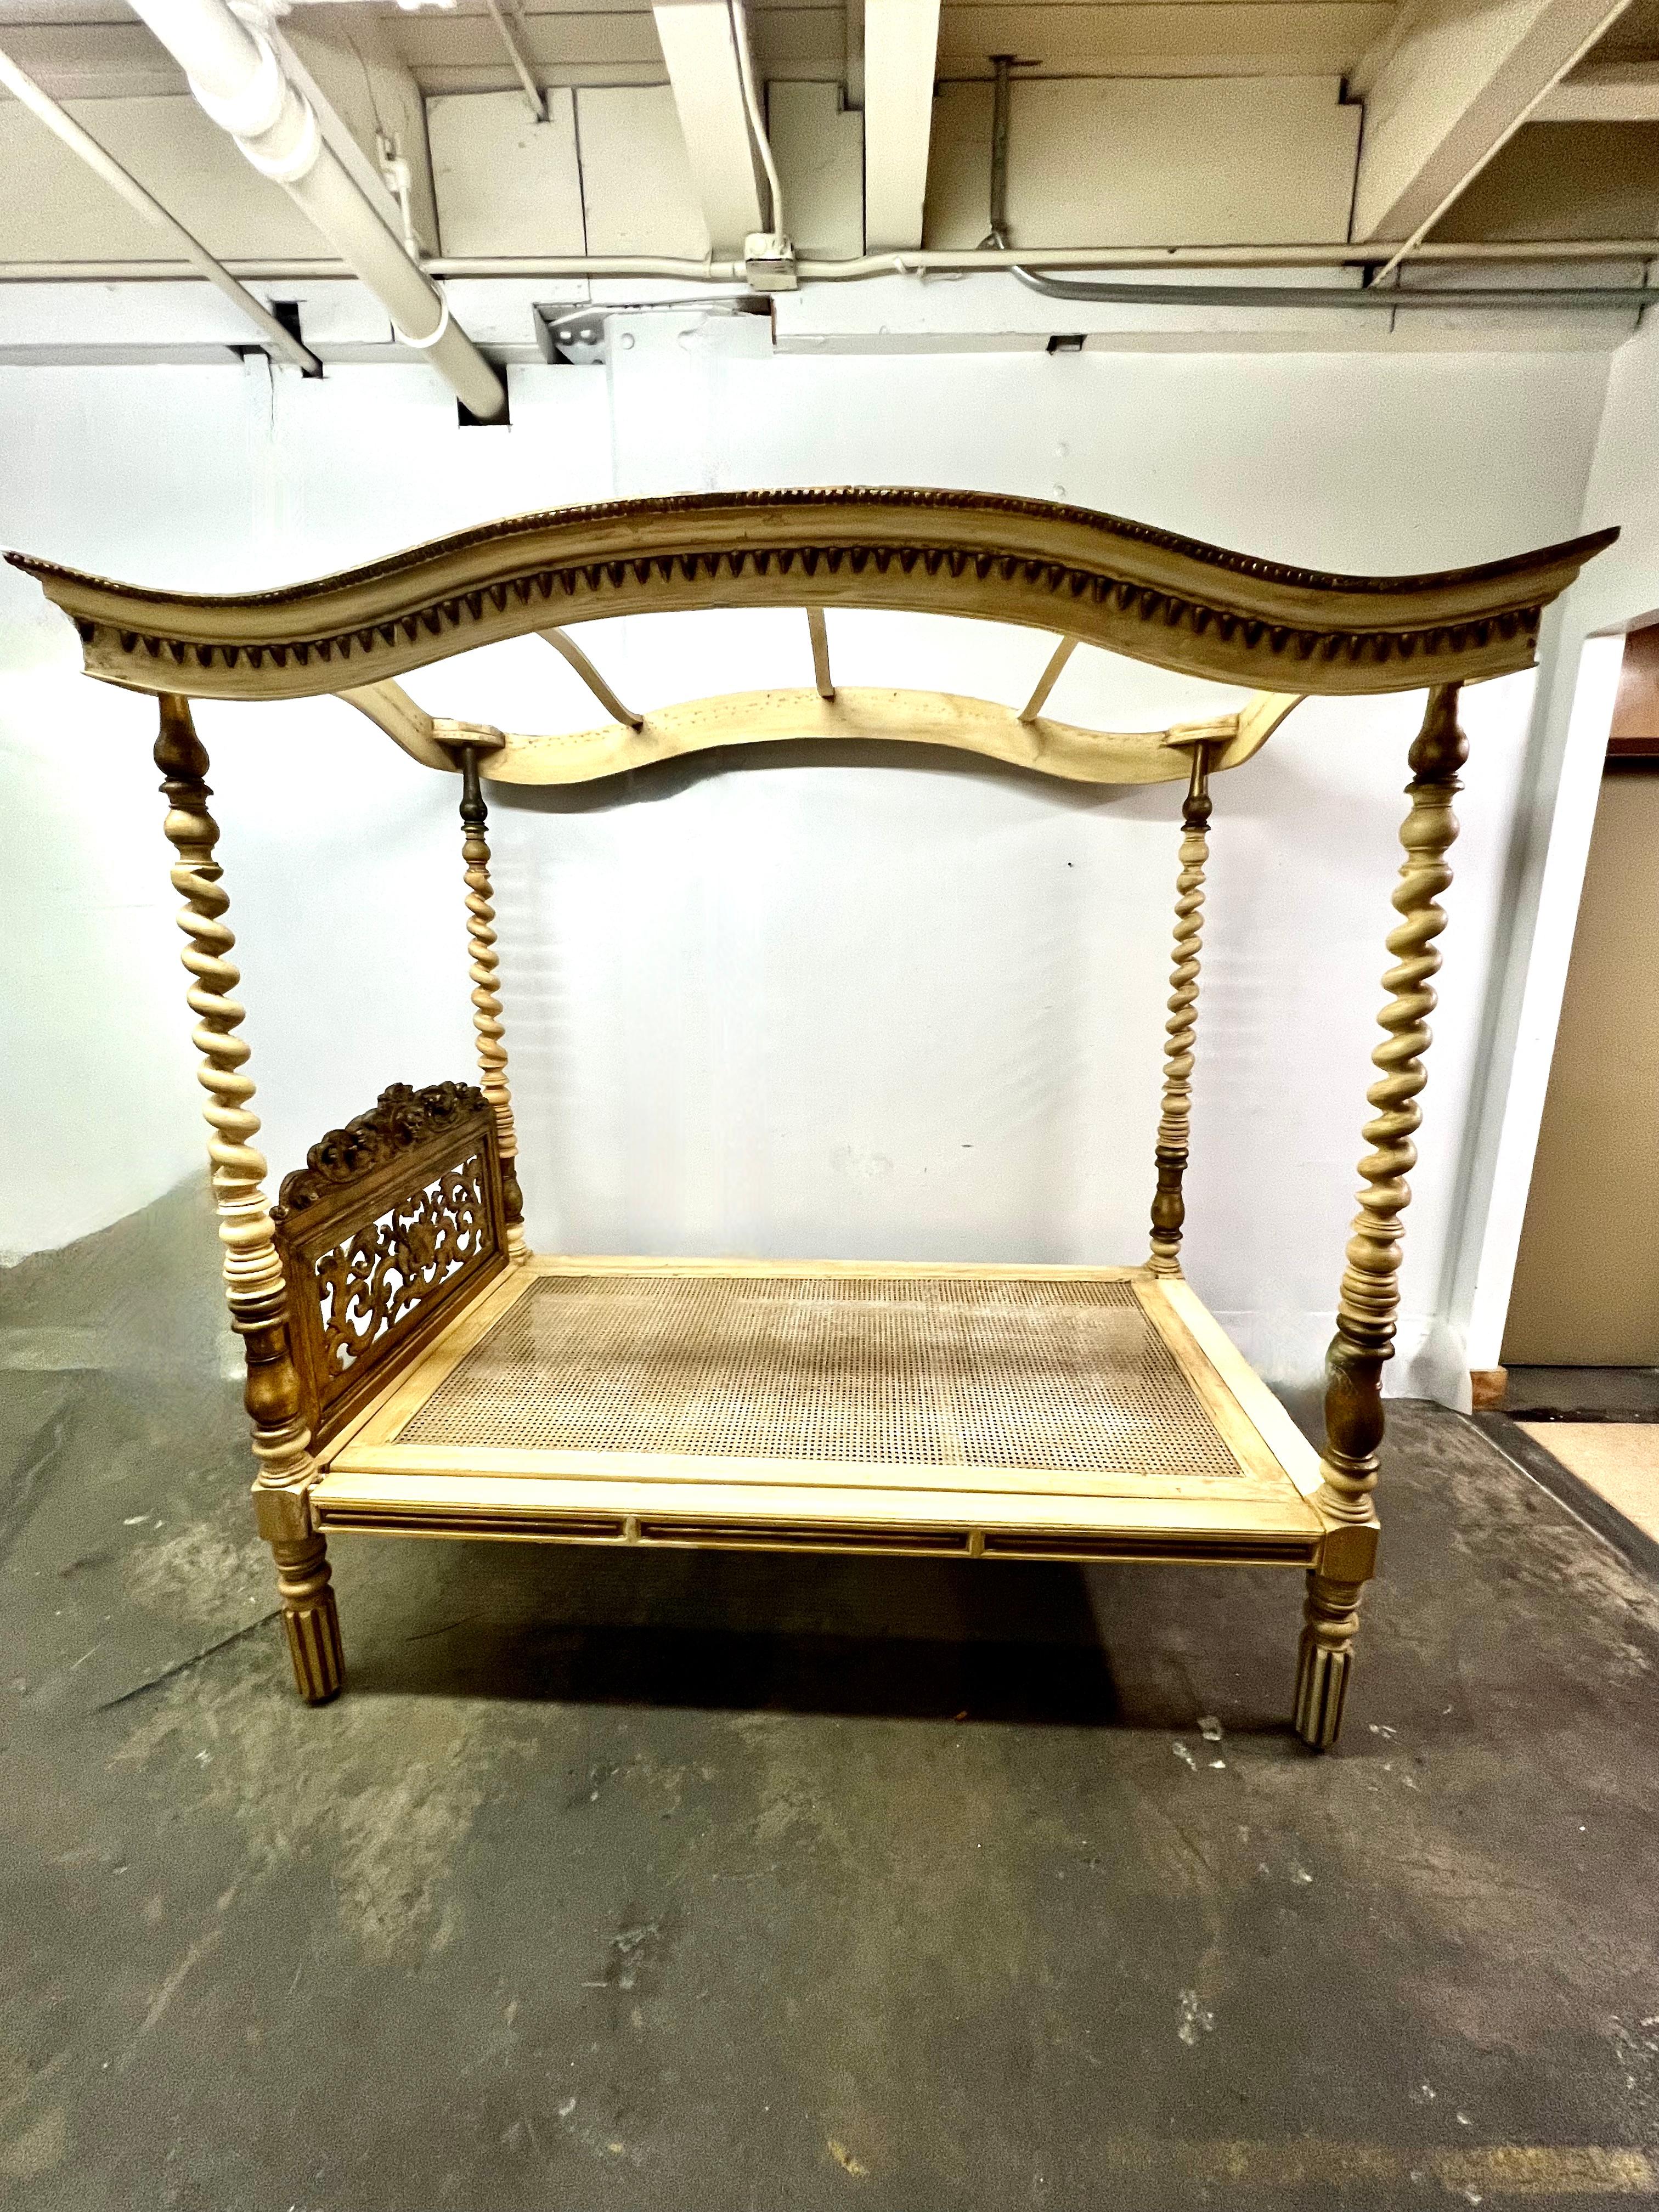 20th Century Egyptian Style Canopy Bed Movie Prop from 1963 Cleopatra with Elizabeth Taylor For Sale